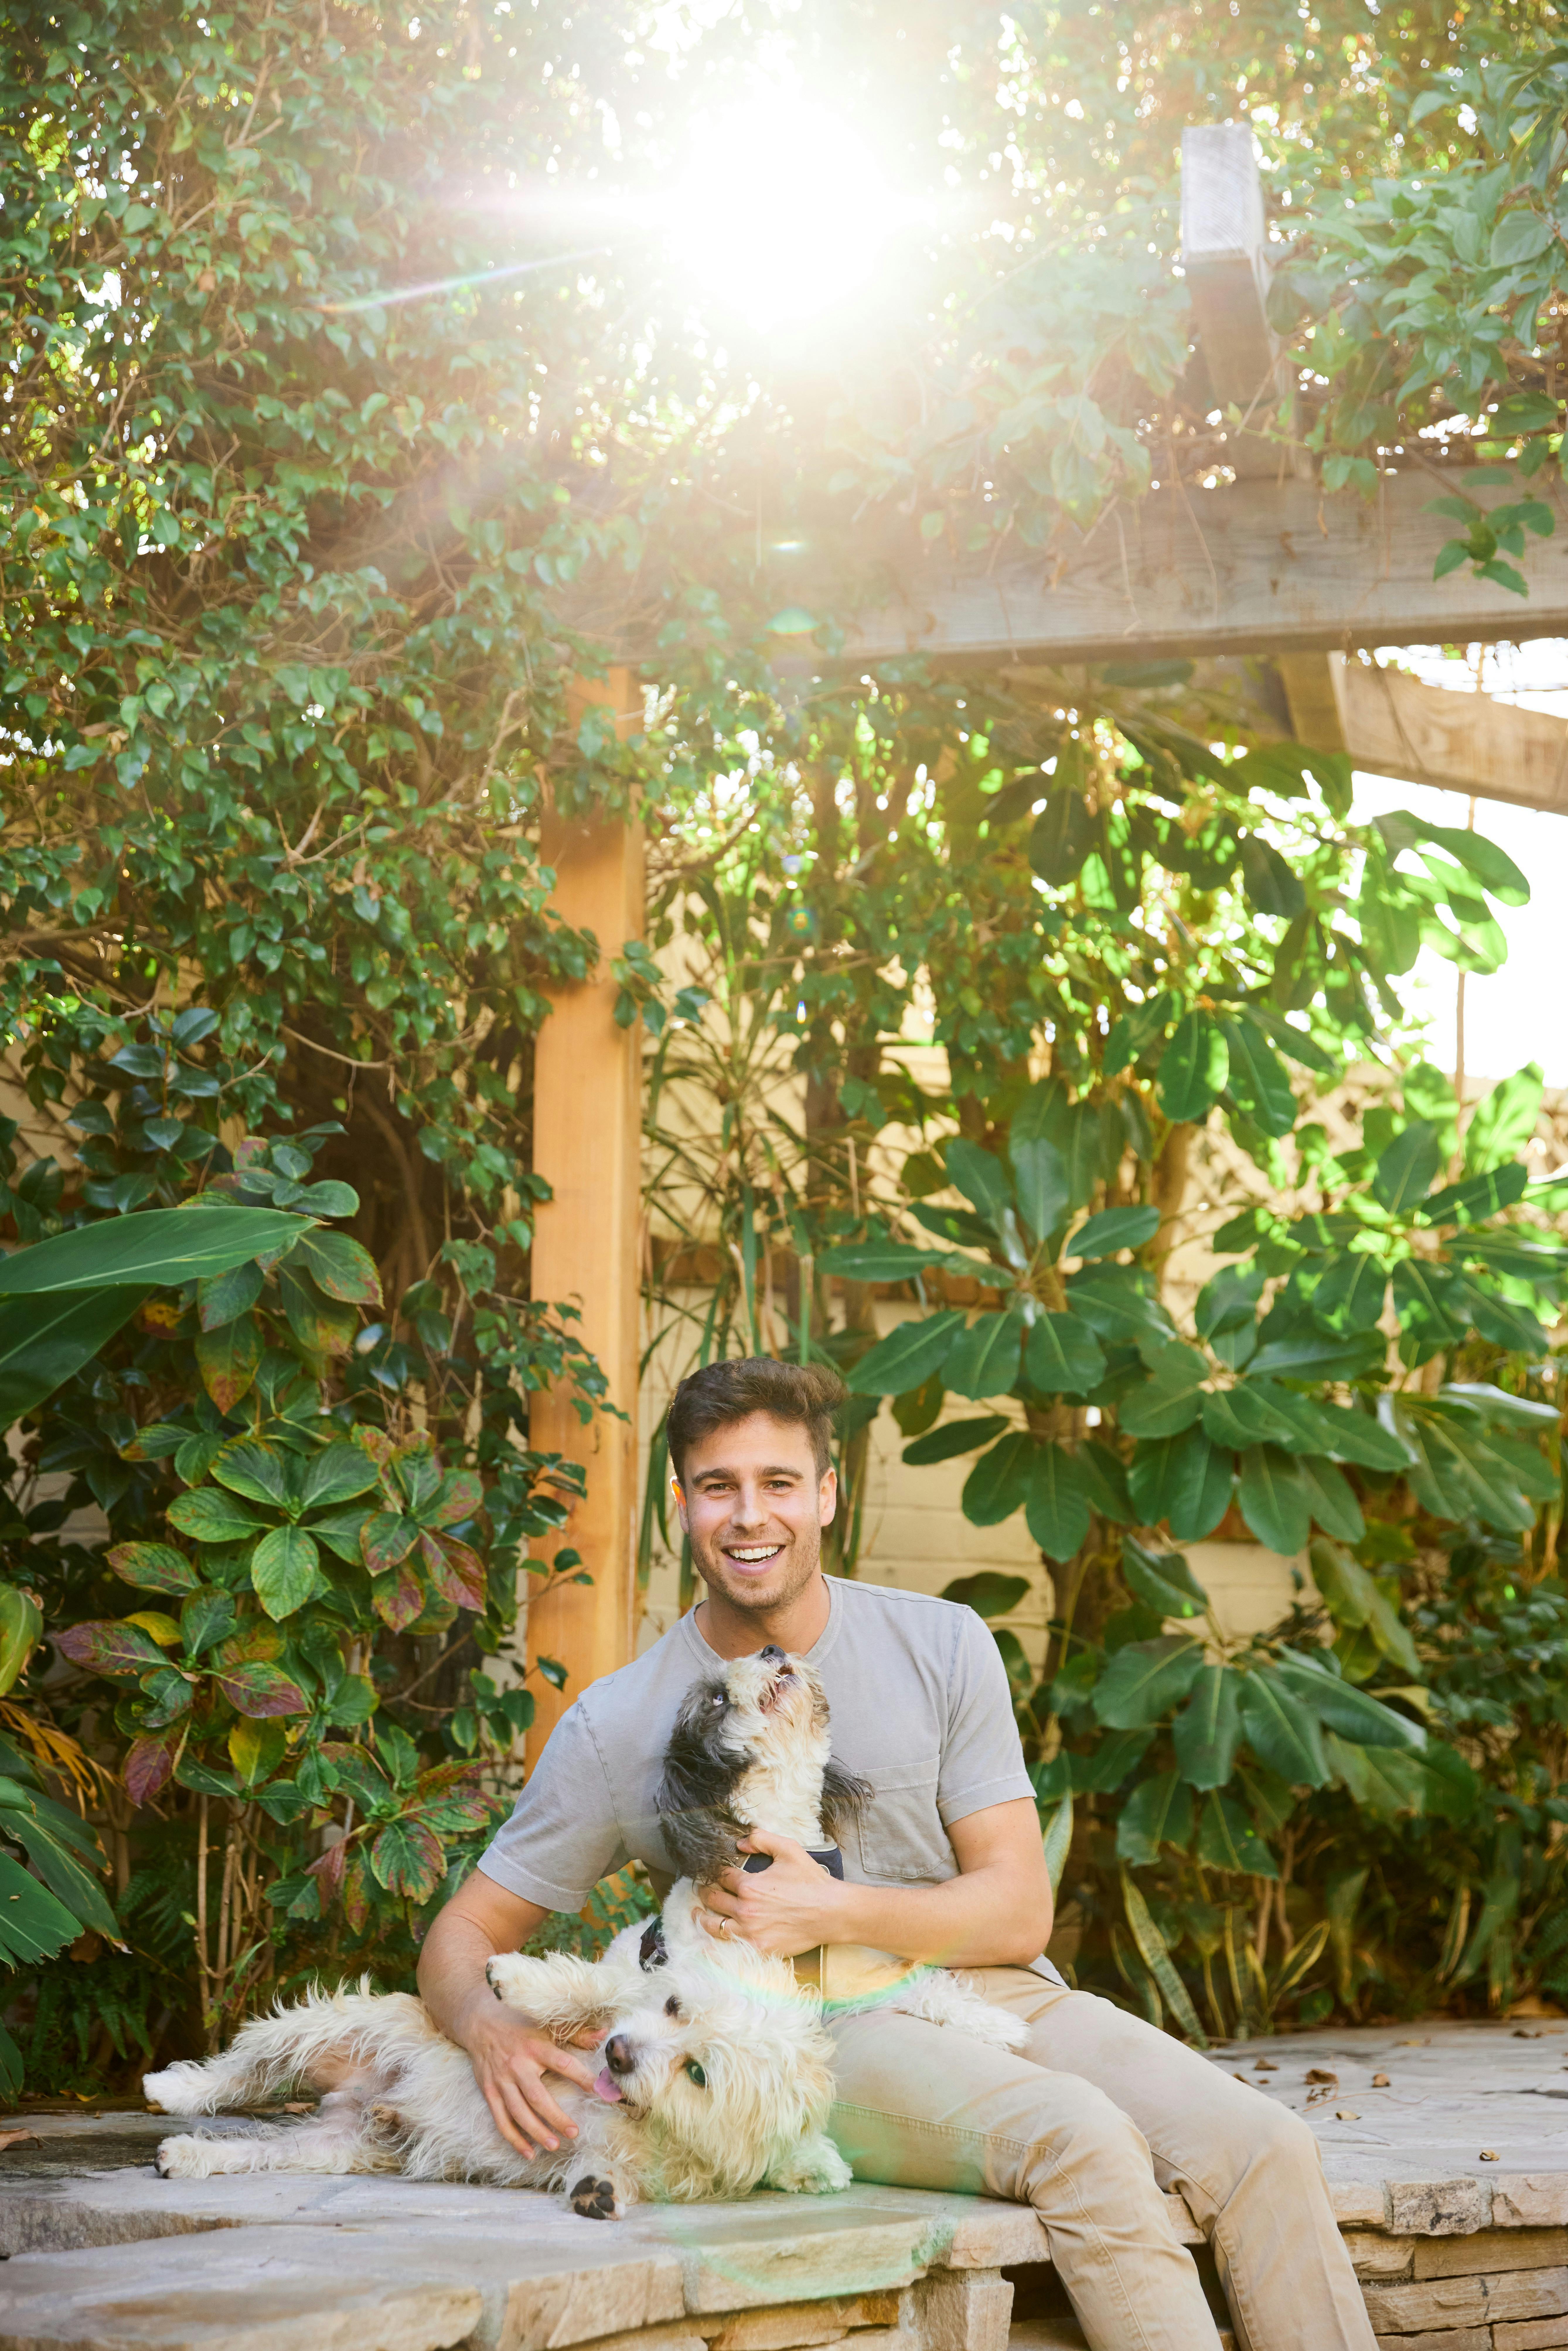 Brandon Werber, Founder & CEO, Airvet in a portrait with his dog